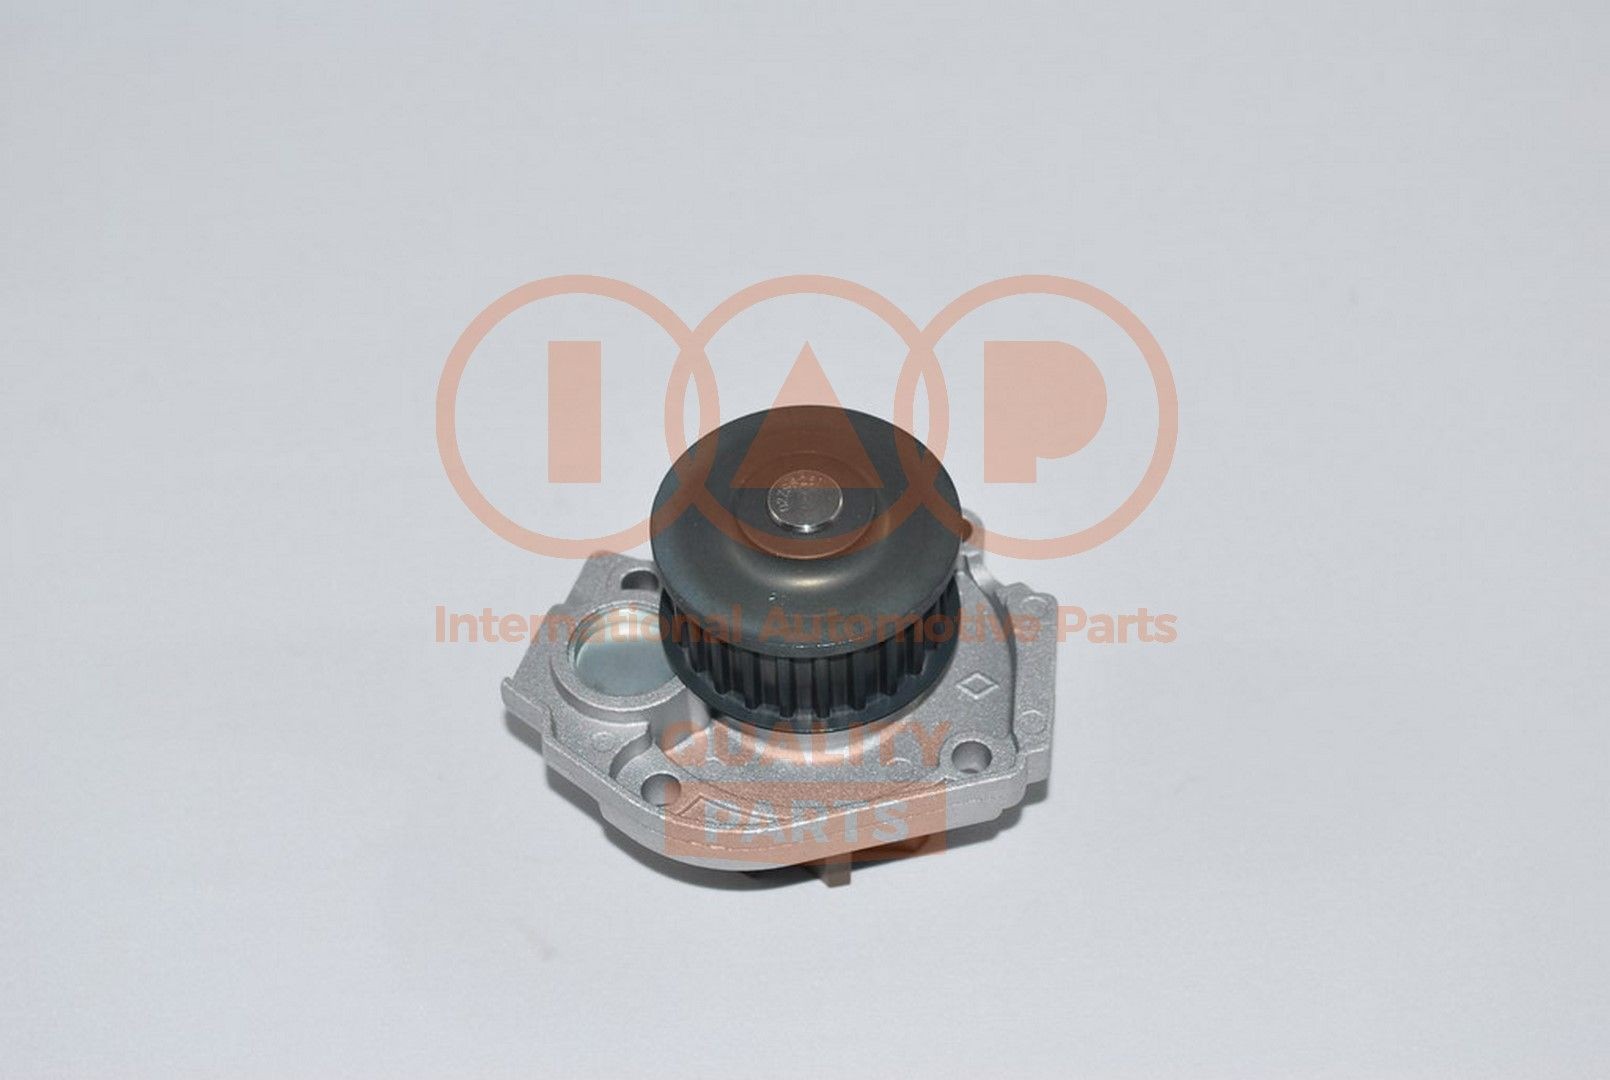 IAP QUALITY PARTS Water pump for engine 150-22042